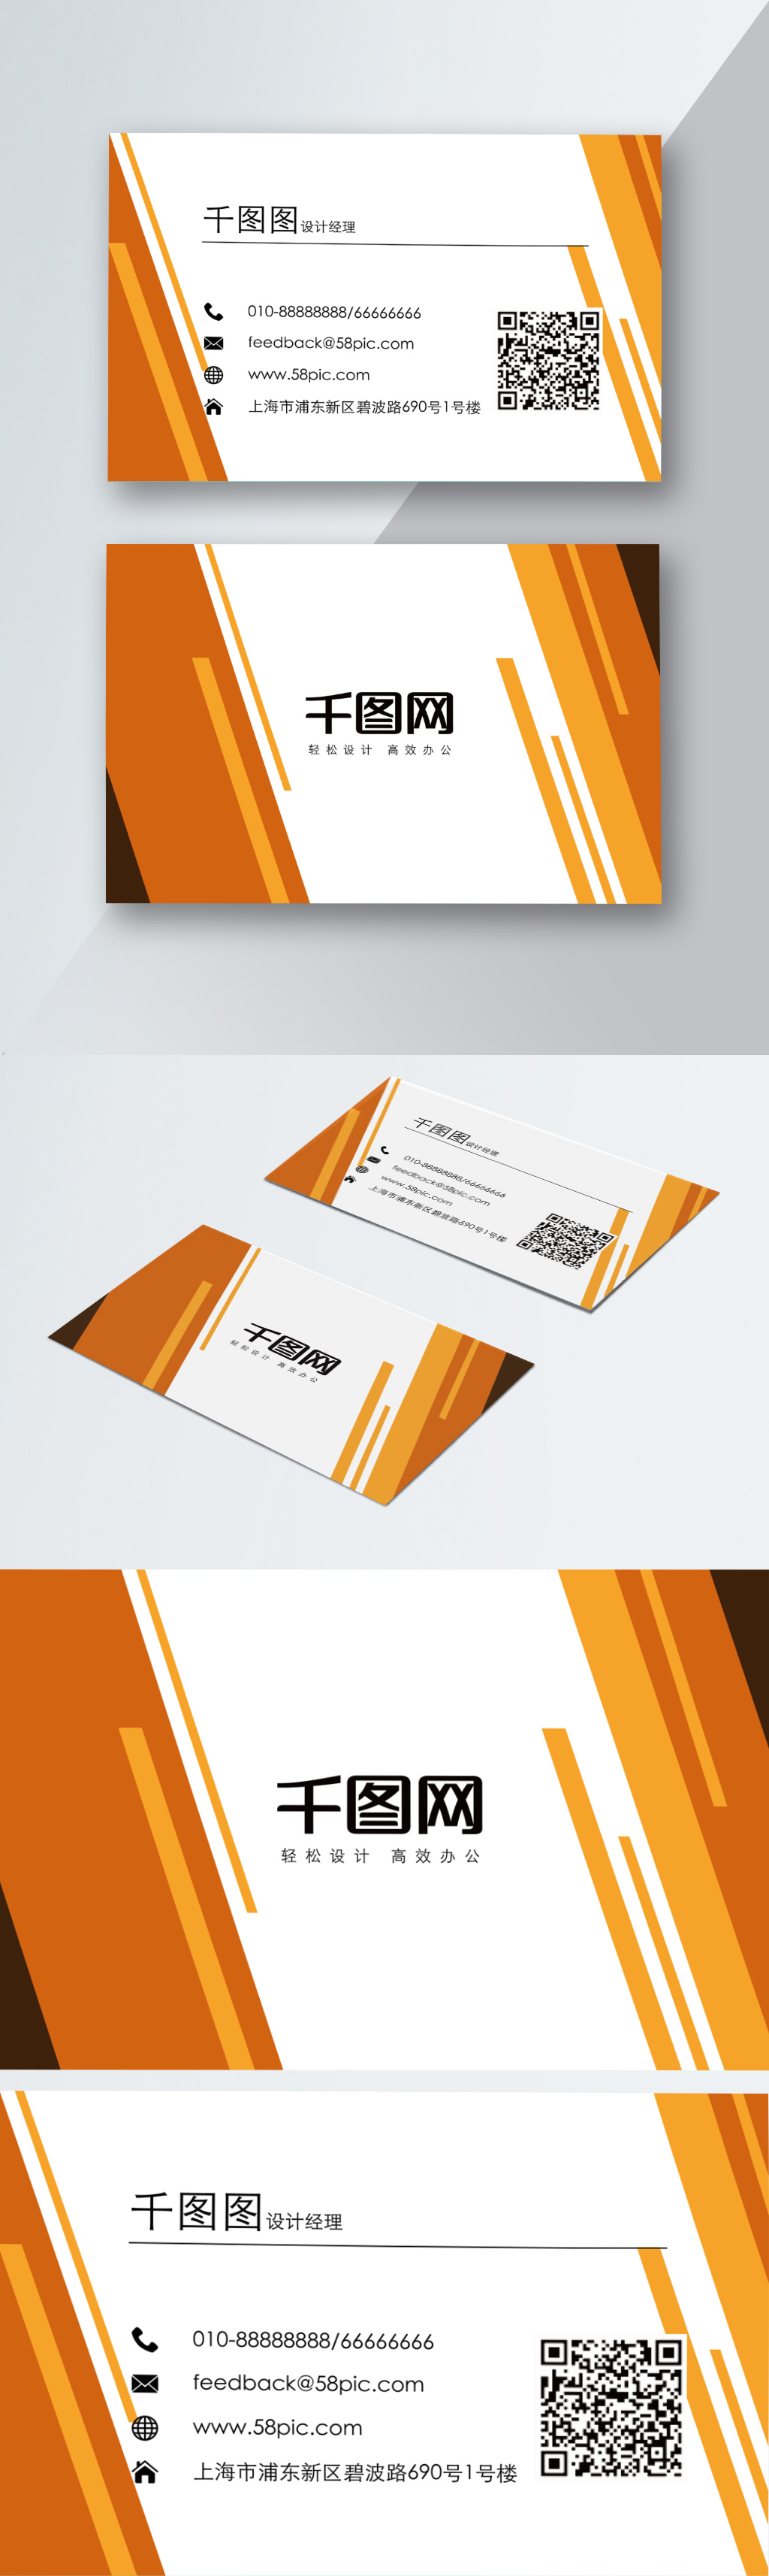 Download Yellow Business Card Template Image Picture Free Download 450006661 Lovepik Com PSD Mockup Templates